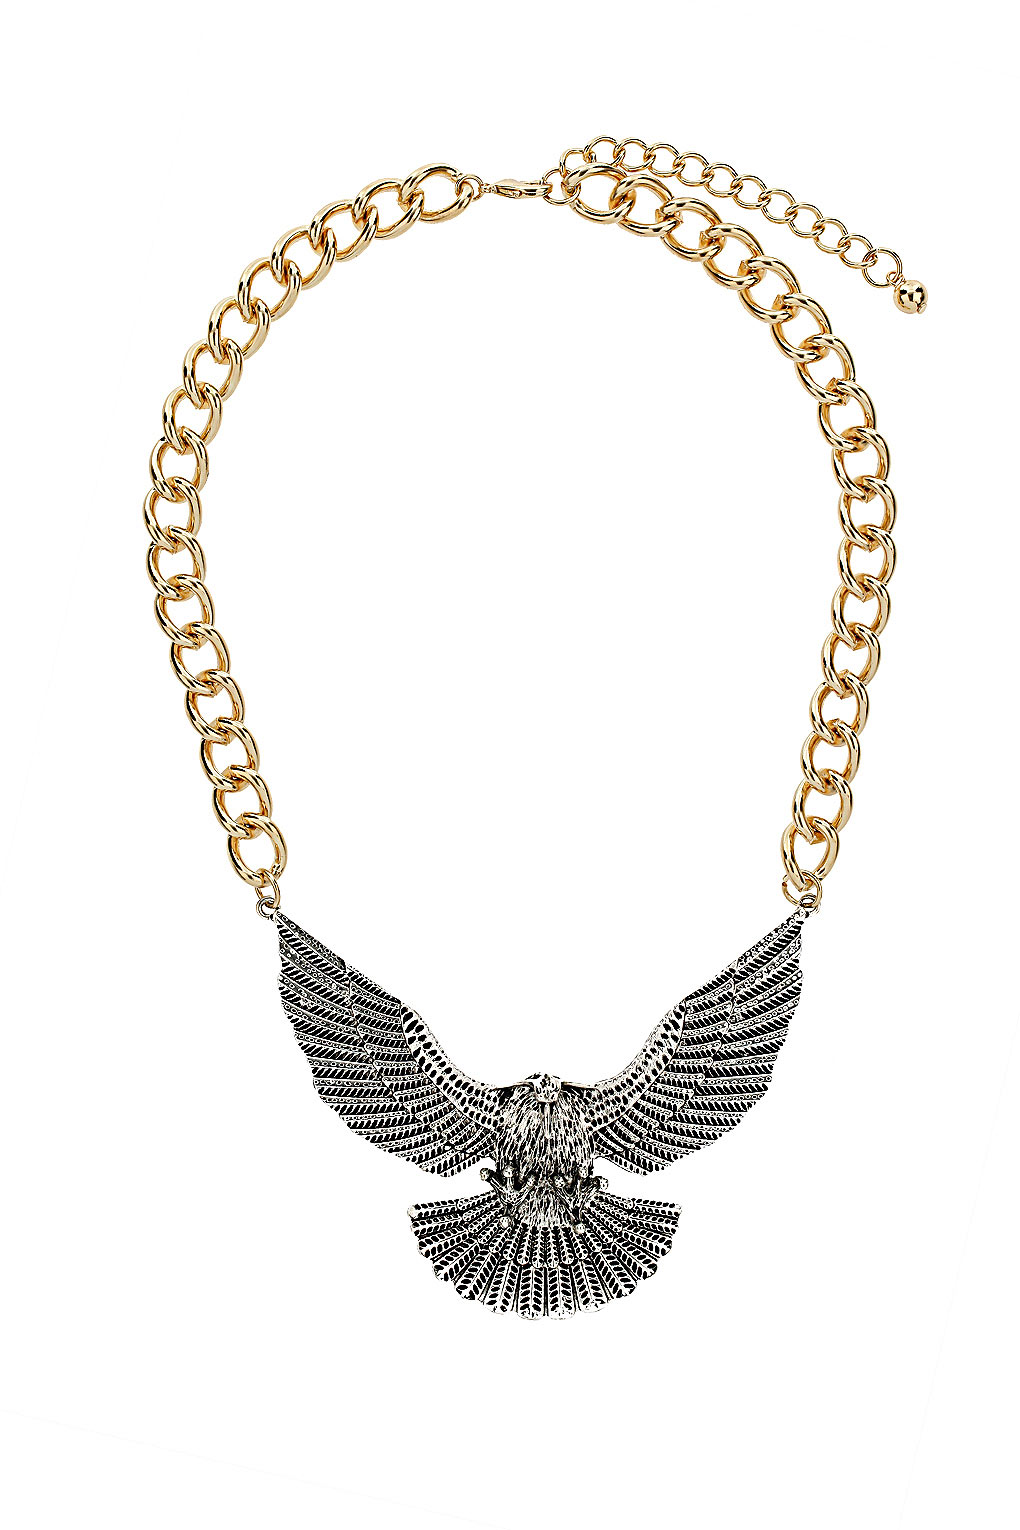 Lyst - Topshop Eagle Necklace in Metallic